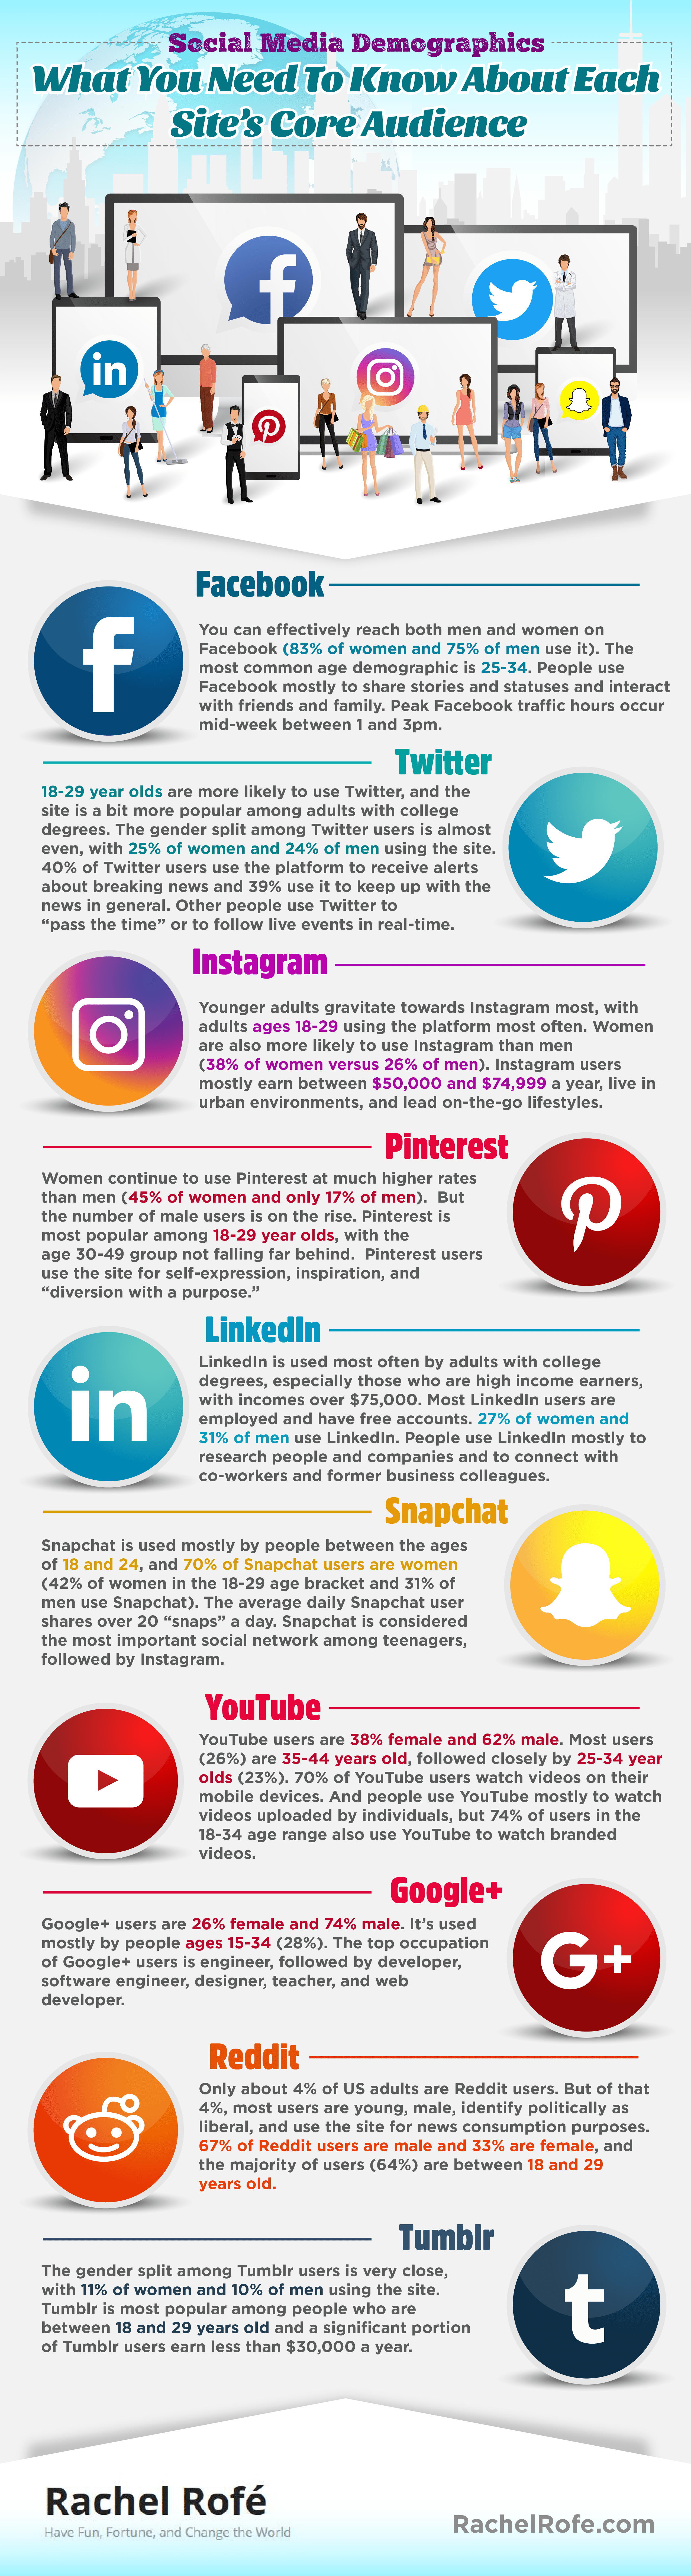 Want to know which social media network is best for you? Check out this infographic.